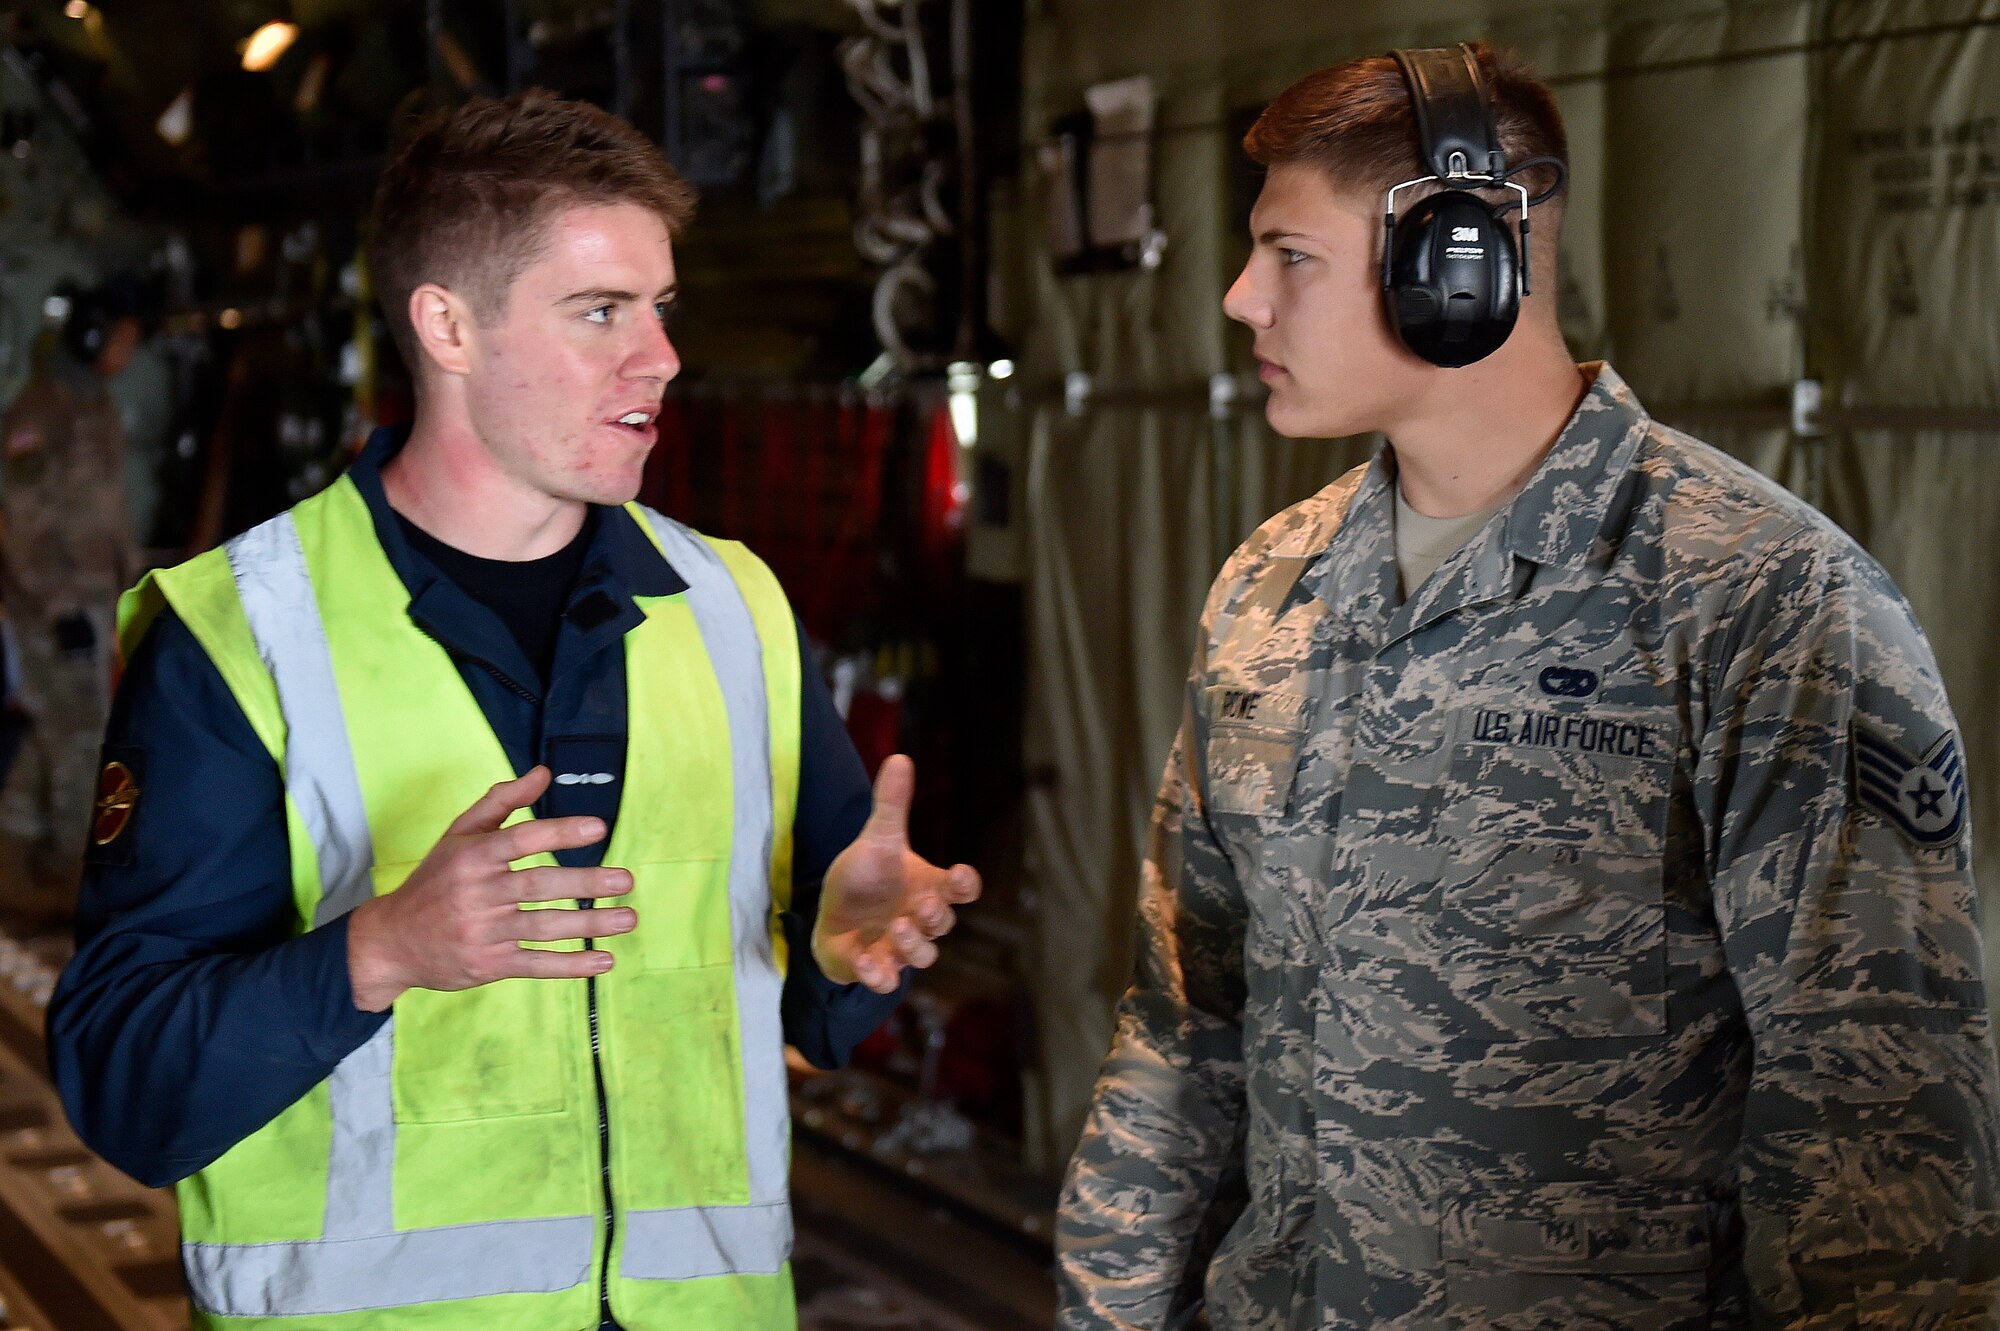 Royal New Zealand Air Force Leading Aircraftsman Thomas Larking and Staff Sgt. Jacob Rowe, 921st Contingency Response Squadron aerial porter, discuss load plans during the Joint Readiness Training Center exercise, April 8, 2018, at the Alexandria International Airport, La. The Airmen conducted joint training with Soldiers from the 2nd Brigade Combat Team, 82nd Airborne Division, providing direct air-land support for safe and efficient airfield operations. (U.S. Air Force photo by Tech. Sgt. Liliana Moreno/Released)